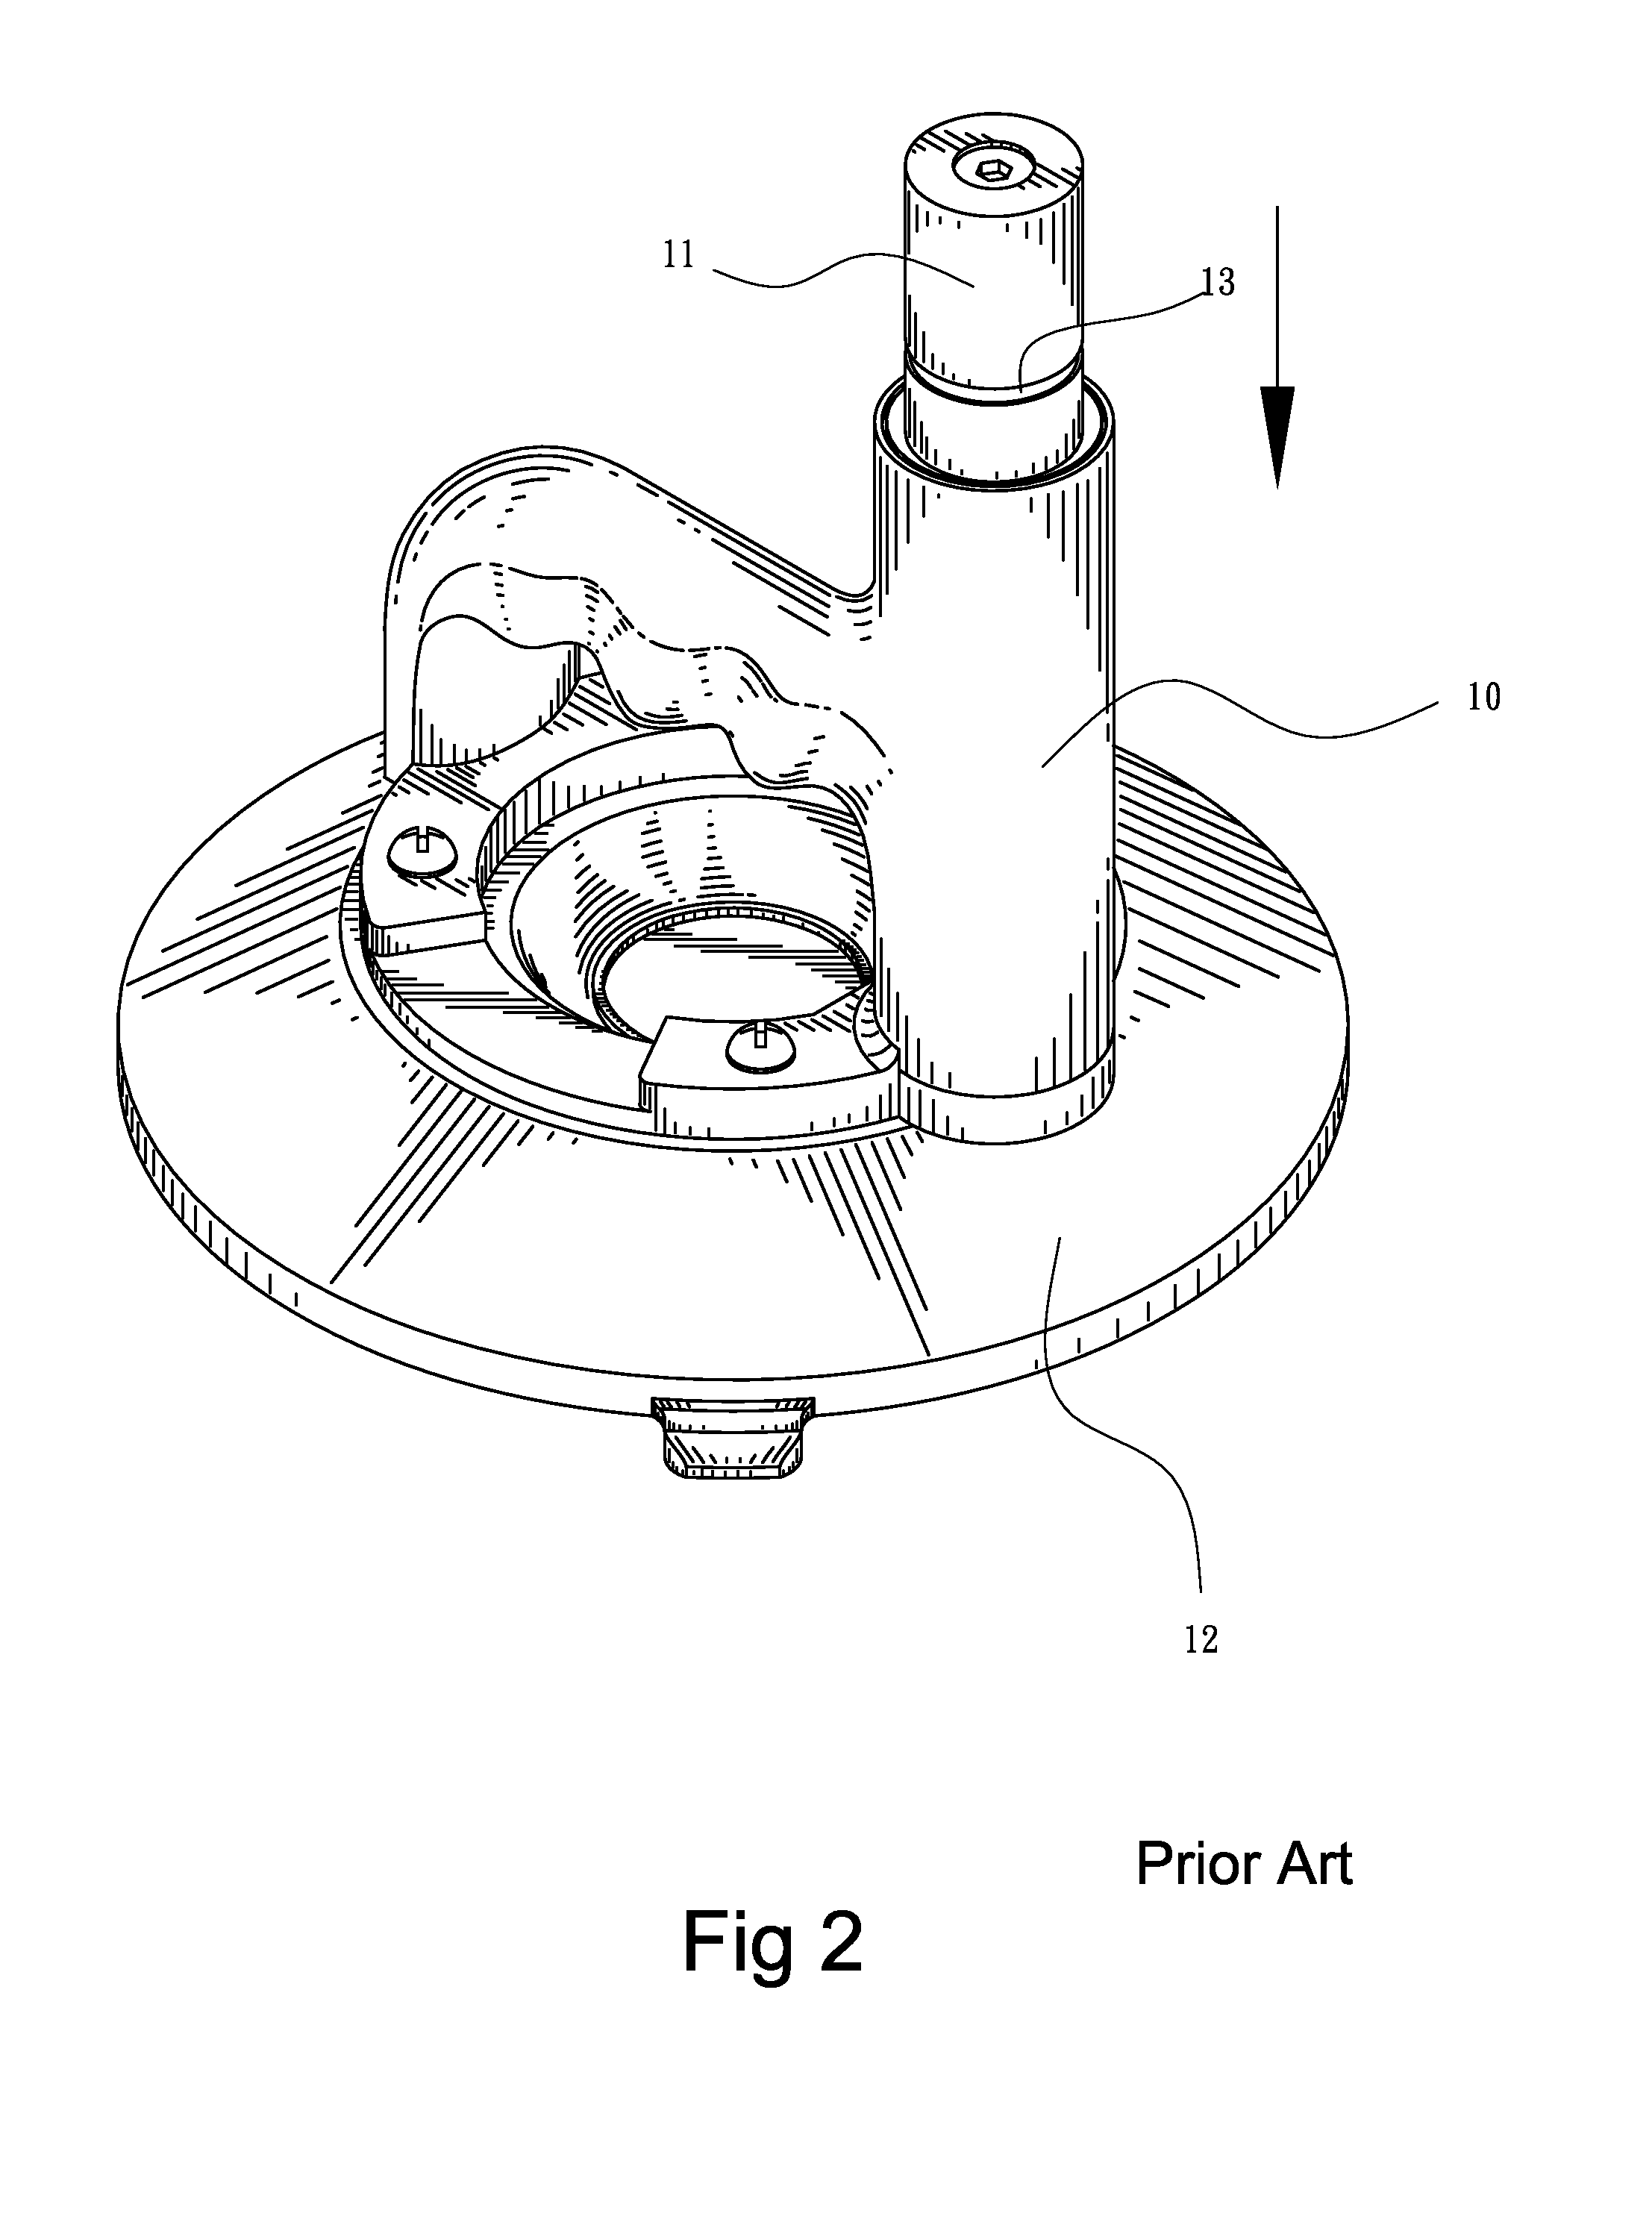 Automatic alert device for suction cup